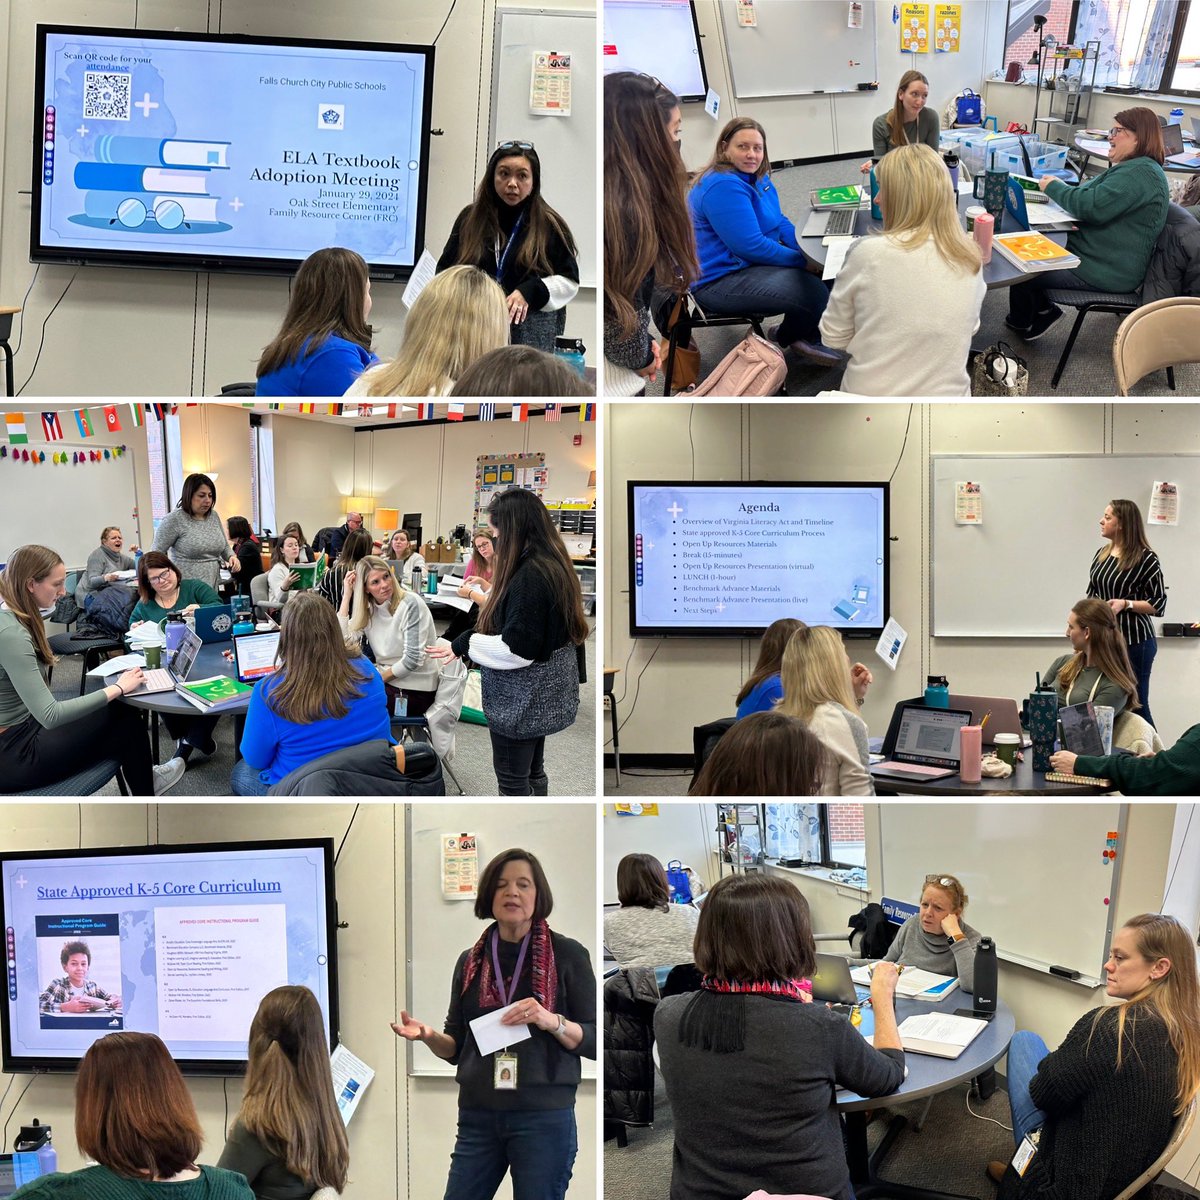 A full day of ELA textbook adoption conversations and exploration @FCCPS . Thank you @ann_baleto, @KMReardon17 and Phyllis Kravinsky for leading this work. @WillBatesFCCPS @os_tigers @mdhippos